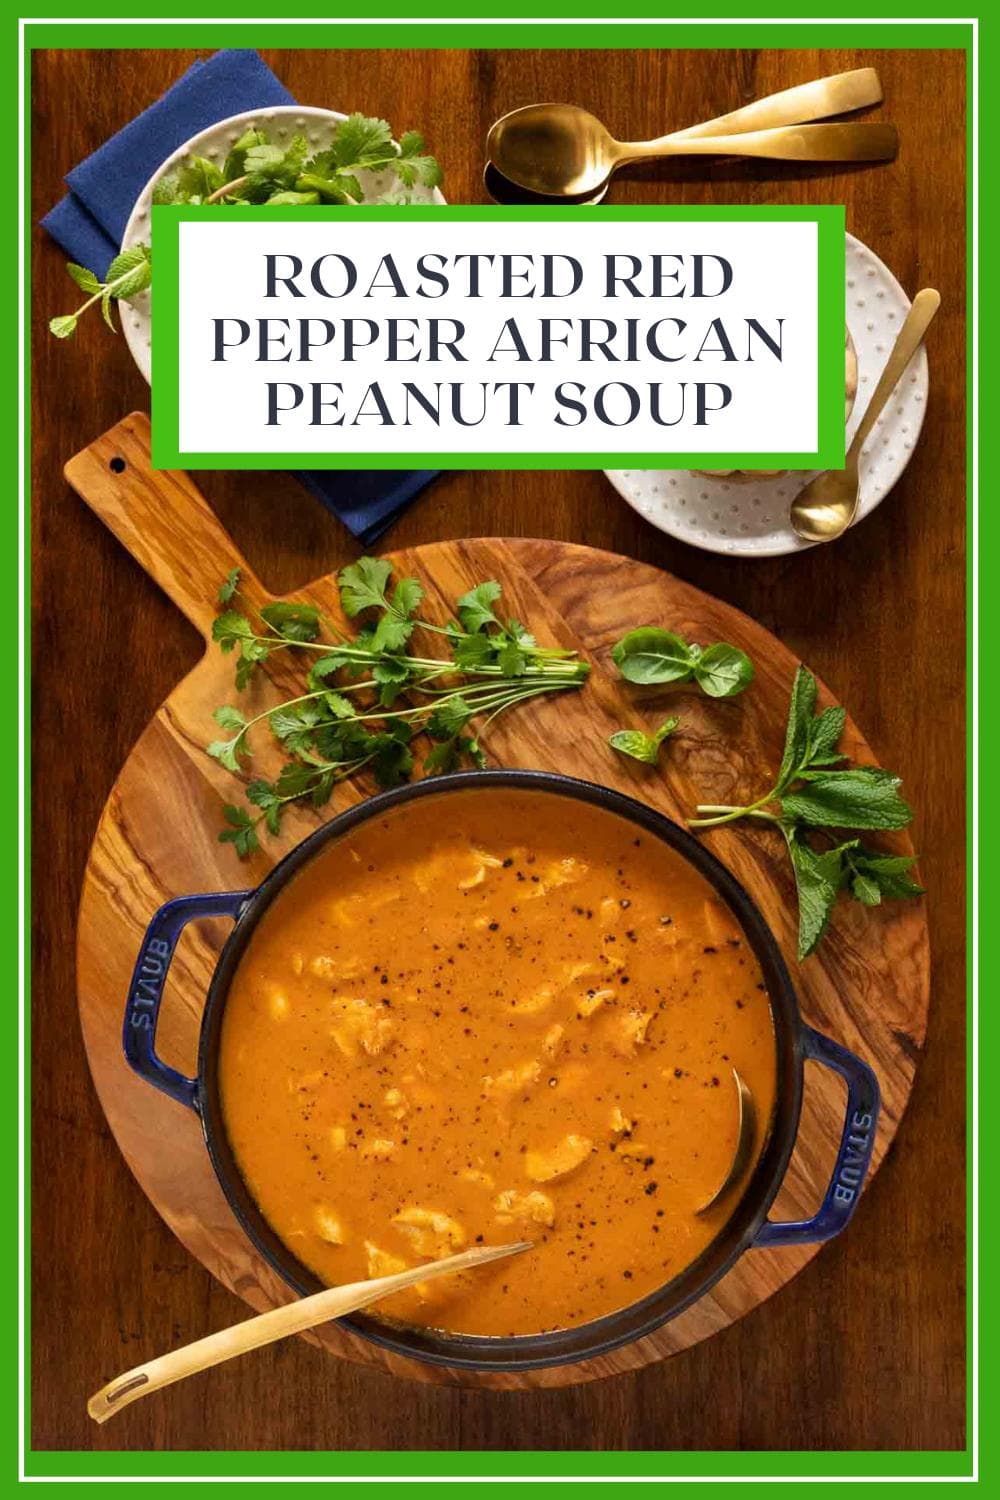 Roasted Red Pepper African Peanut Soup